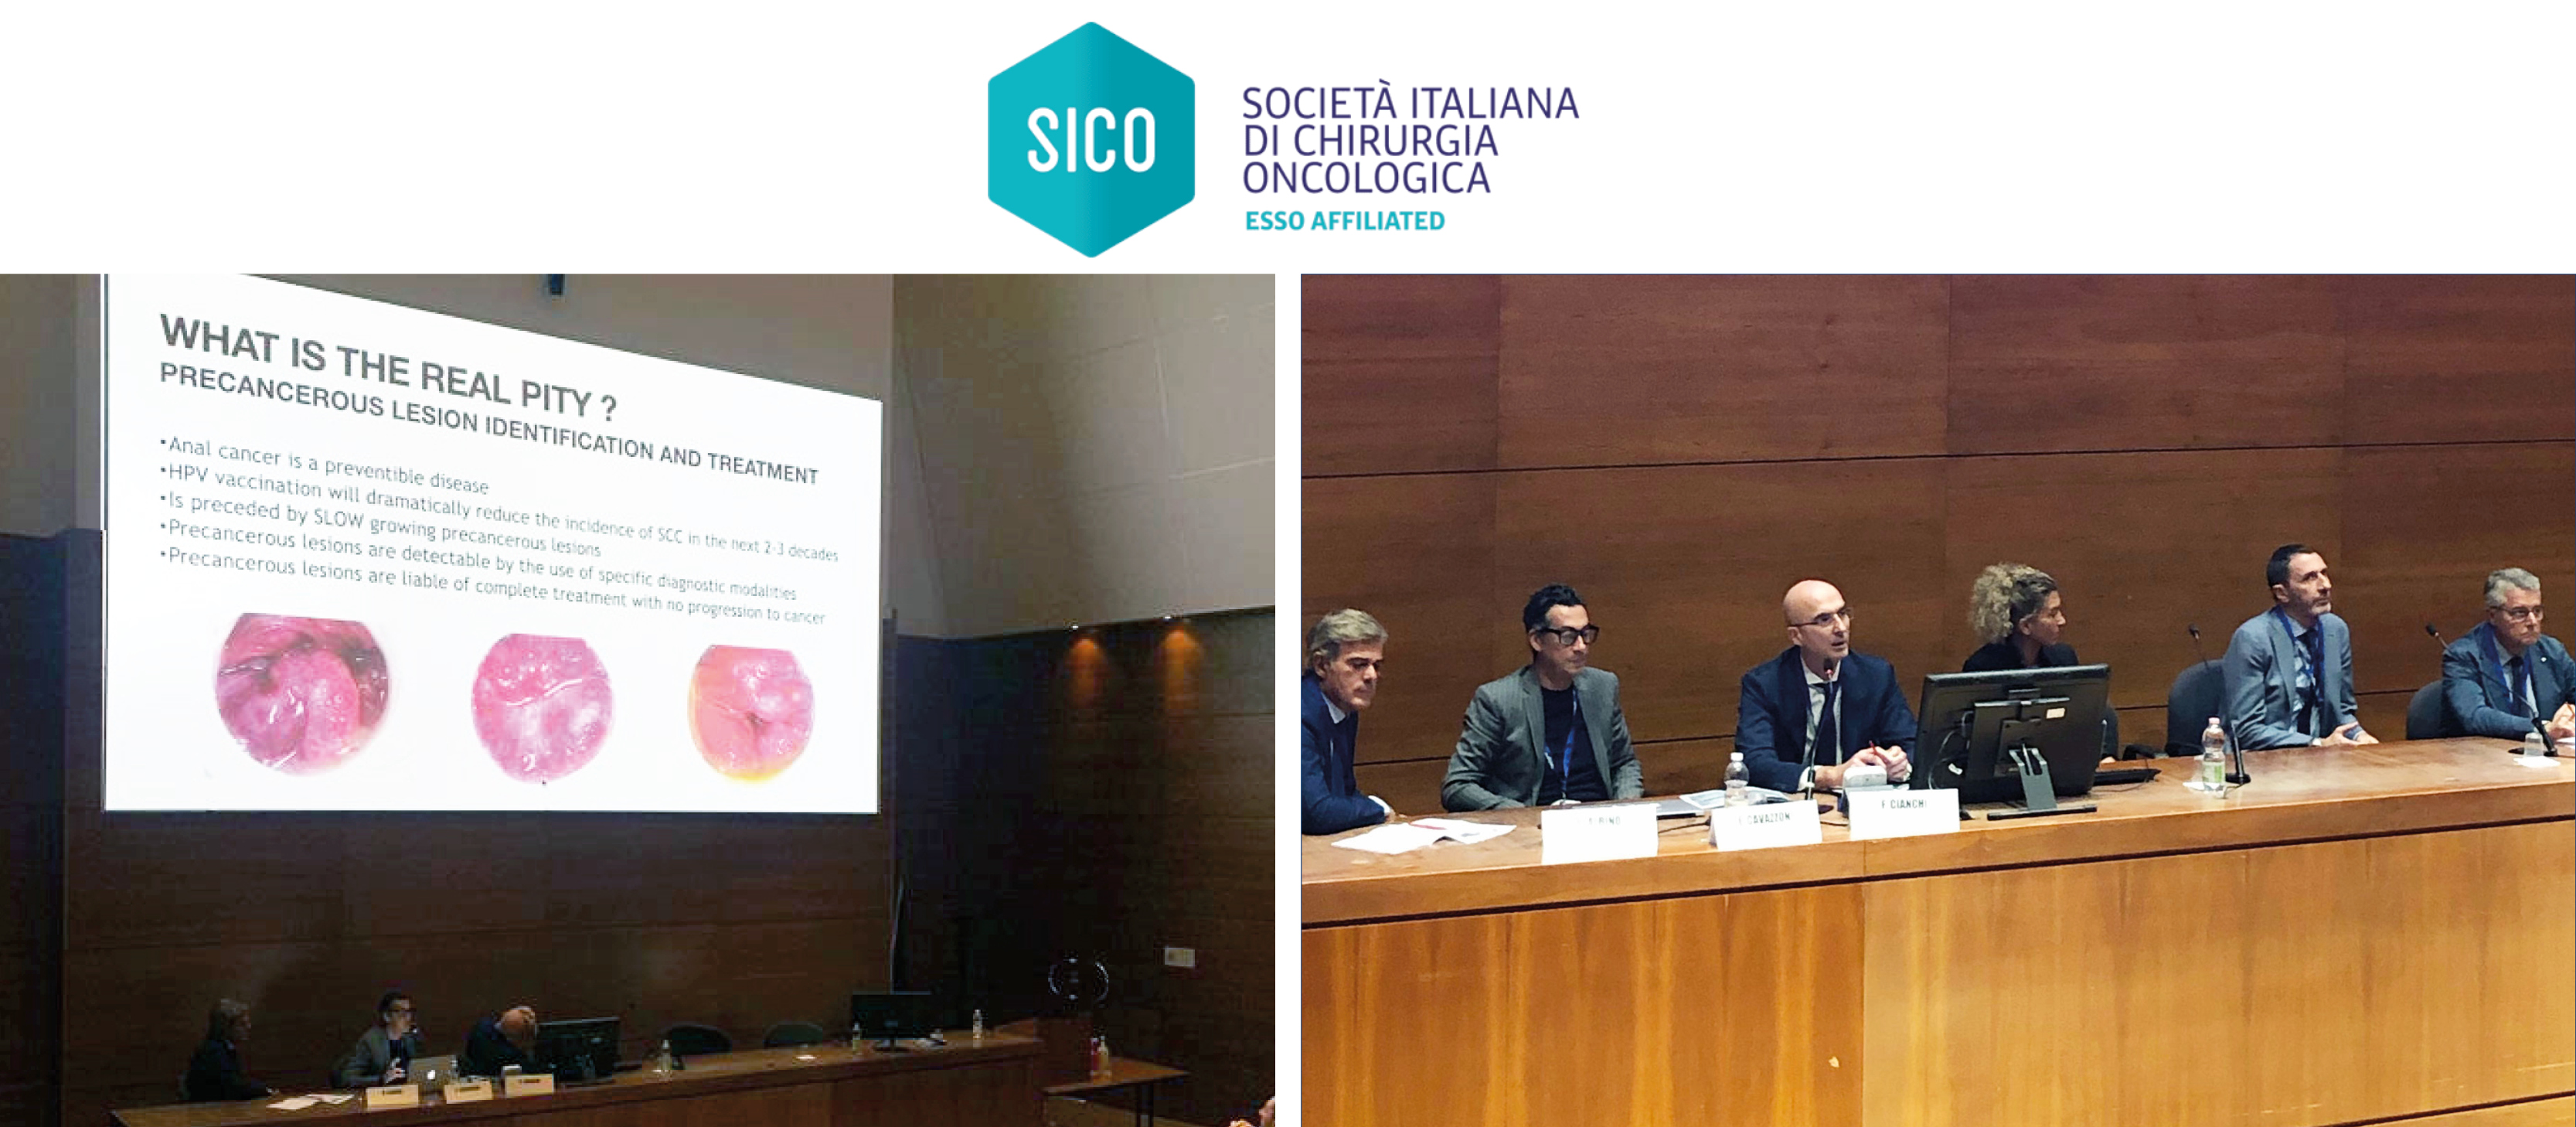 On 25-27 September THD was in Siena to participate in the V International Surgical Conference of Surgical Oncology.